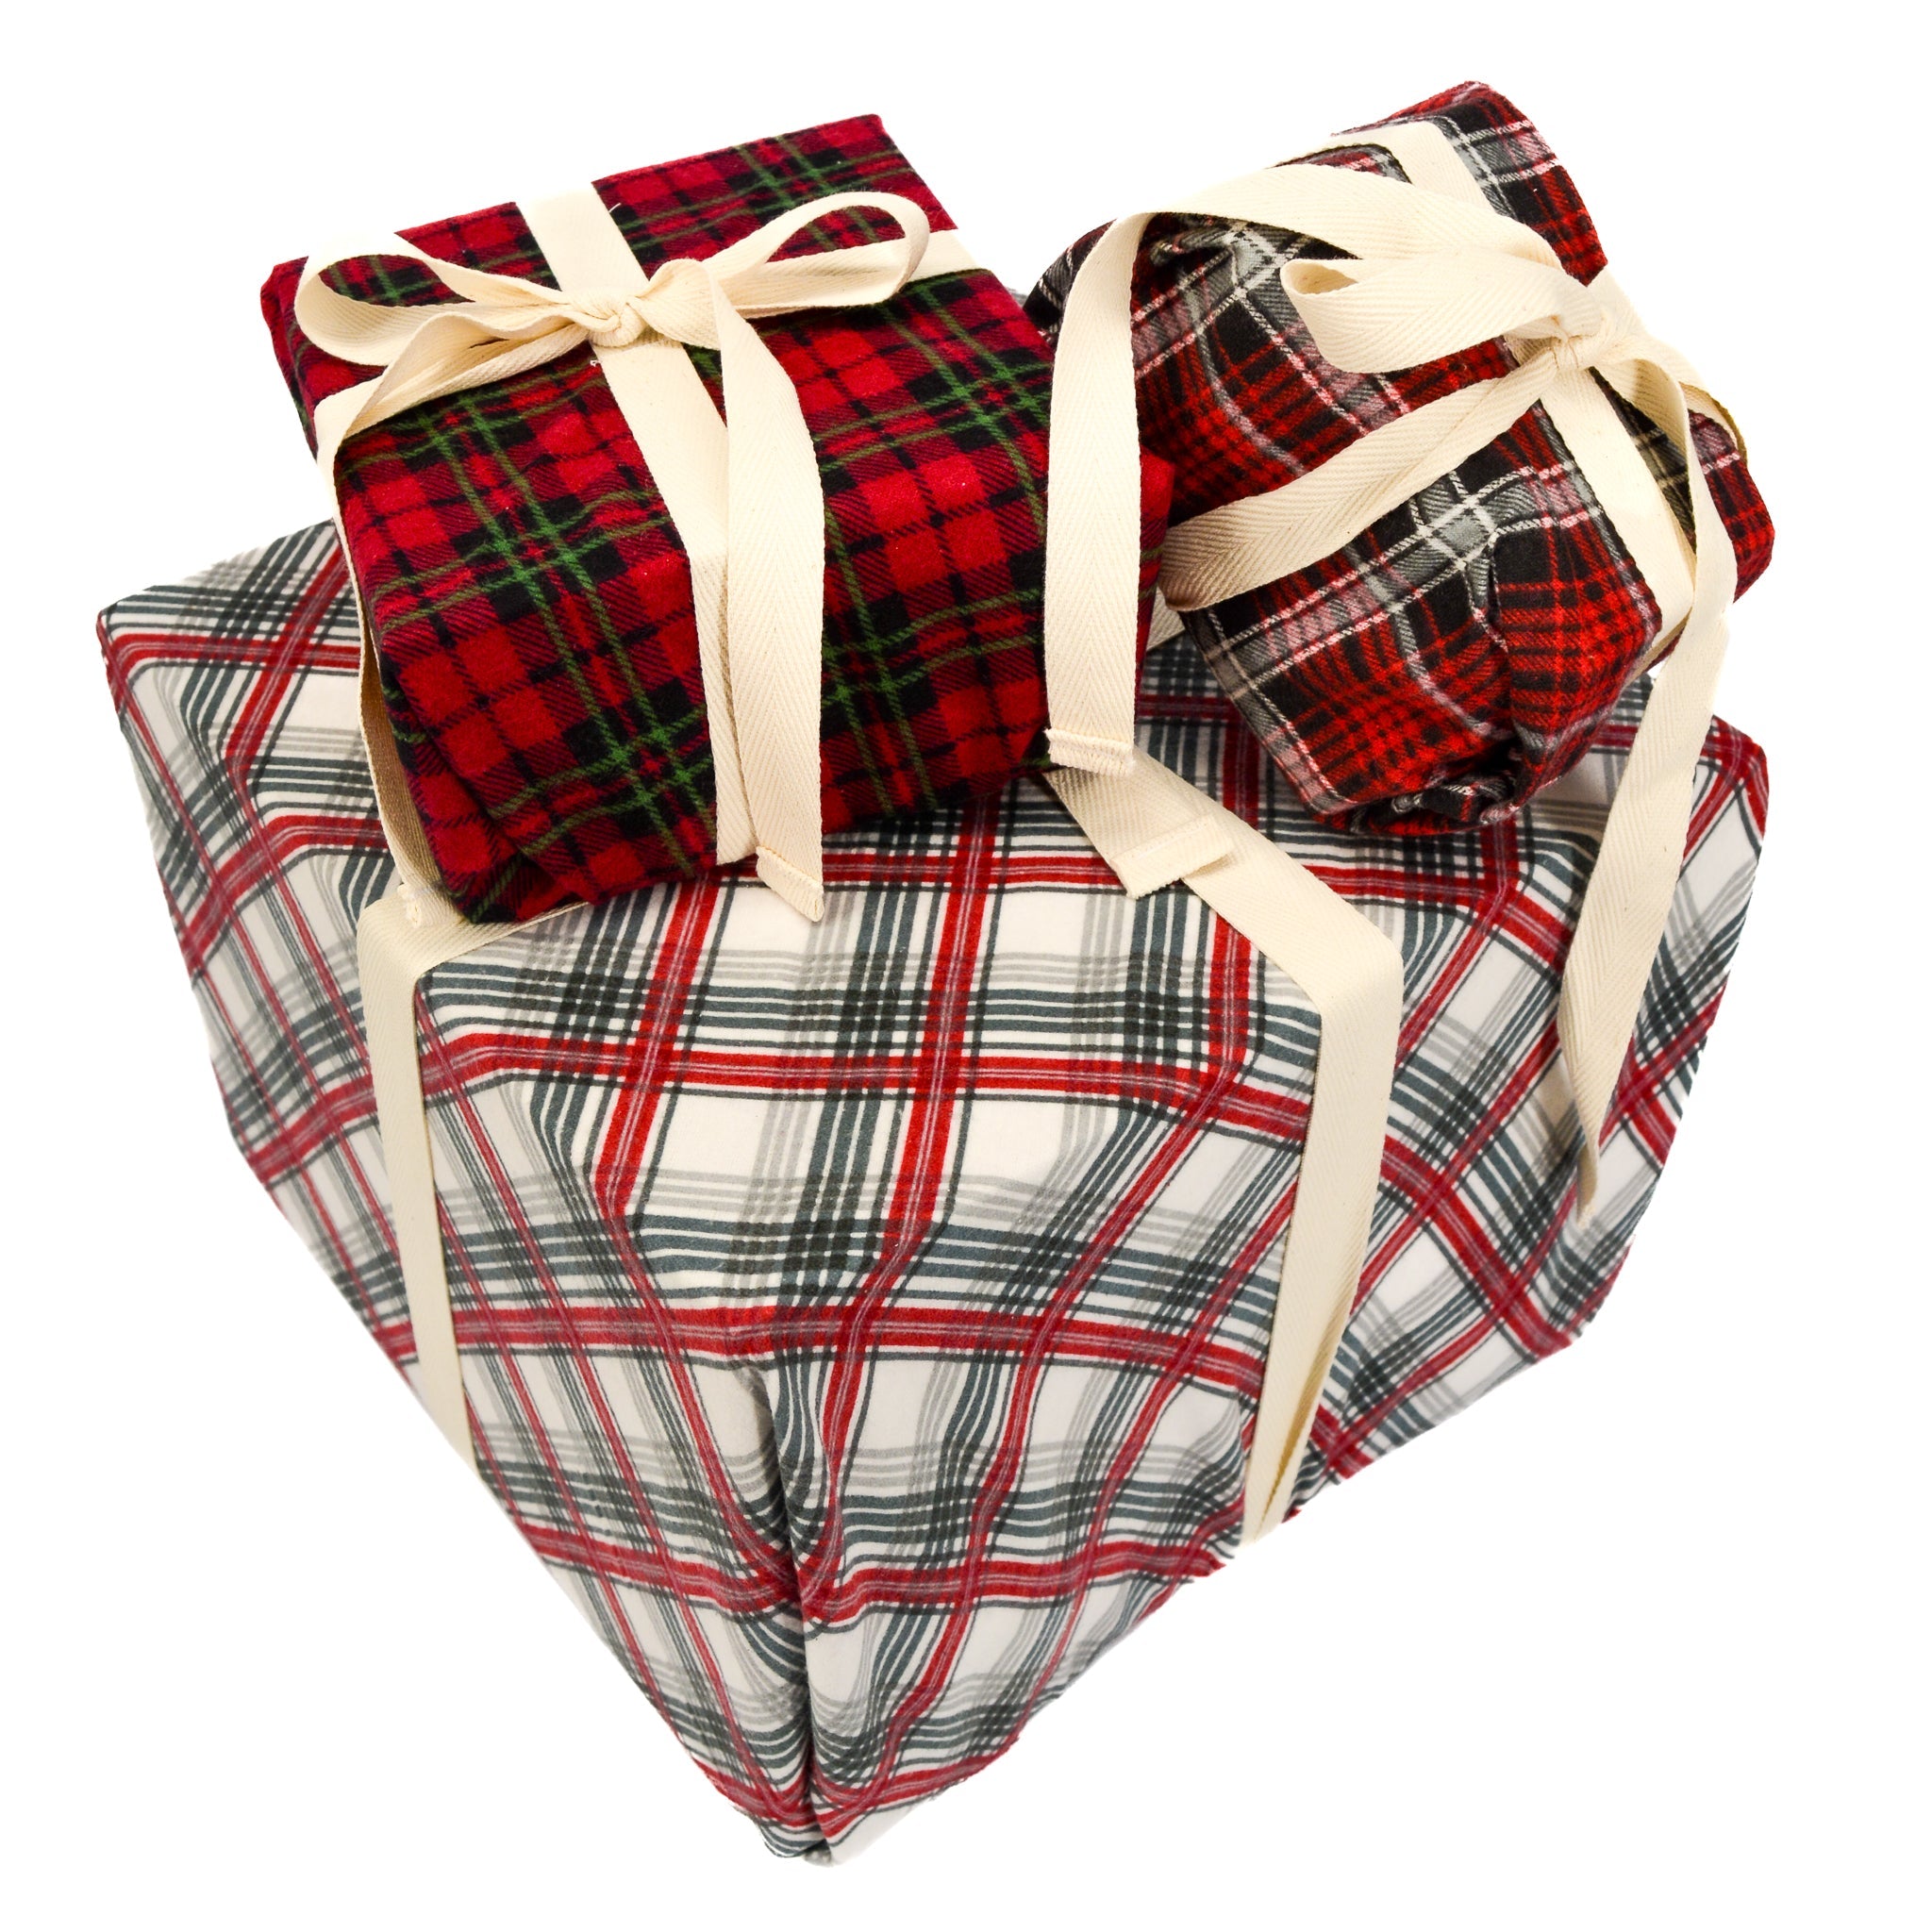 Reusable Gift Wrap: Holiday Plaid - Marley&#39;s Monsters